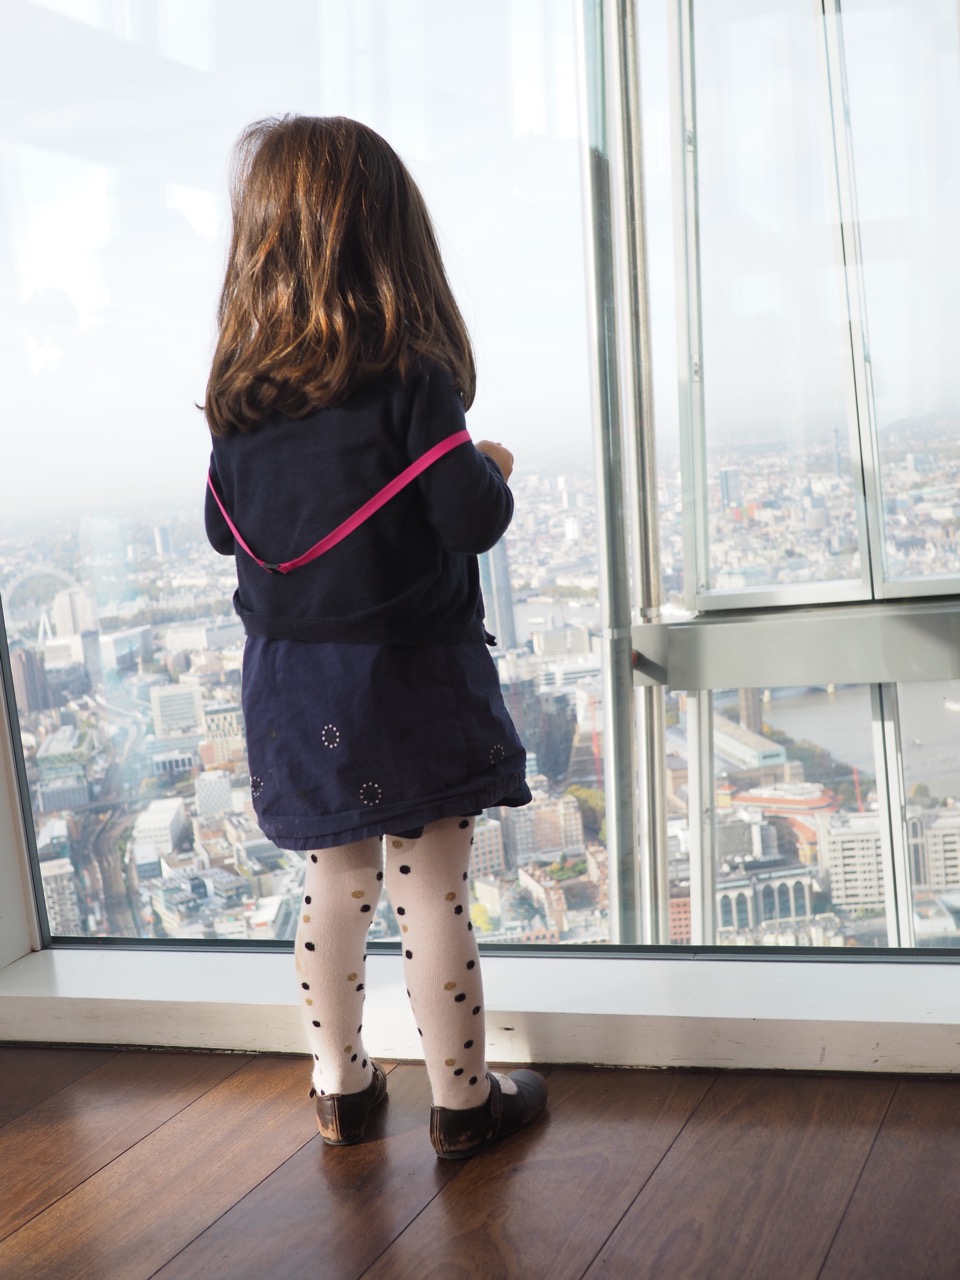 visiter The View from the shard en famille